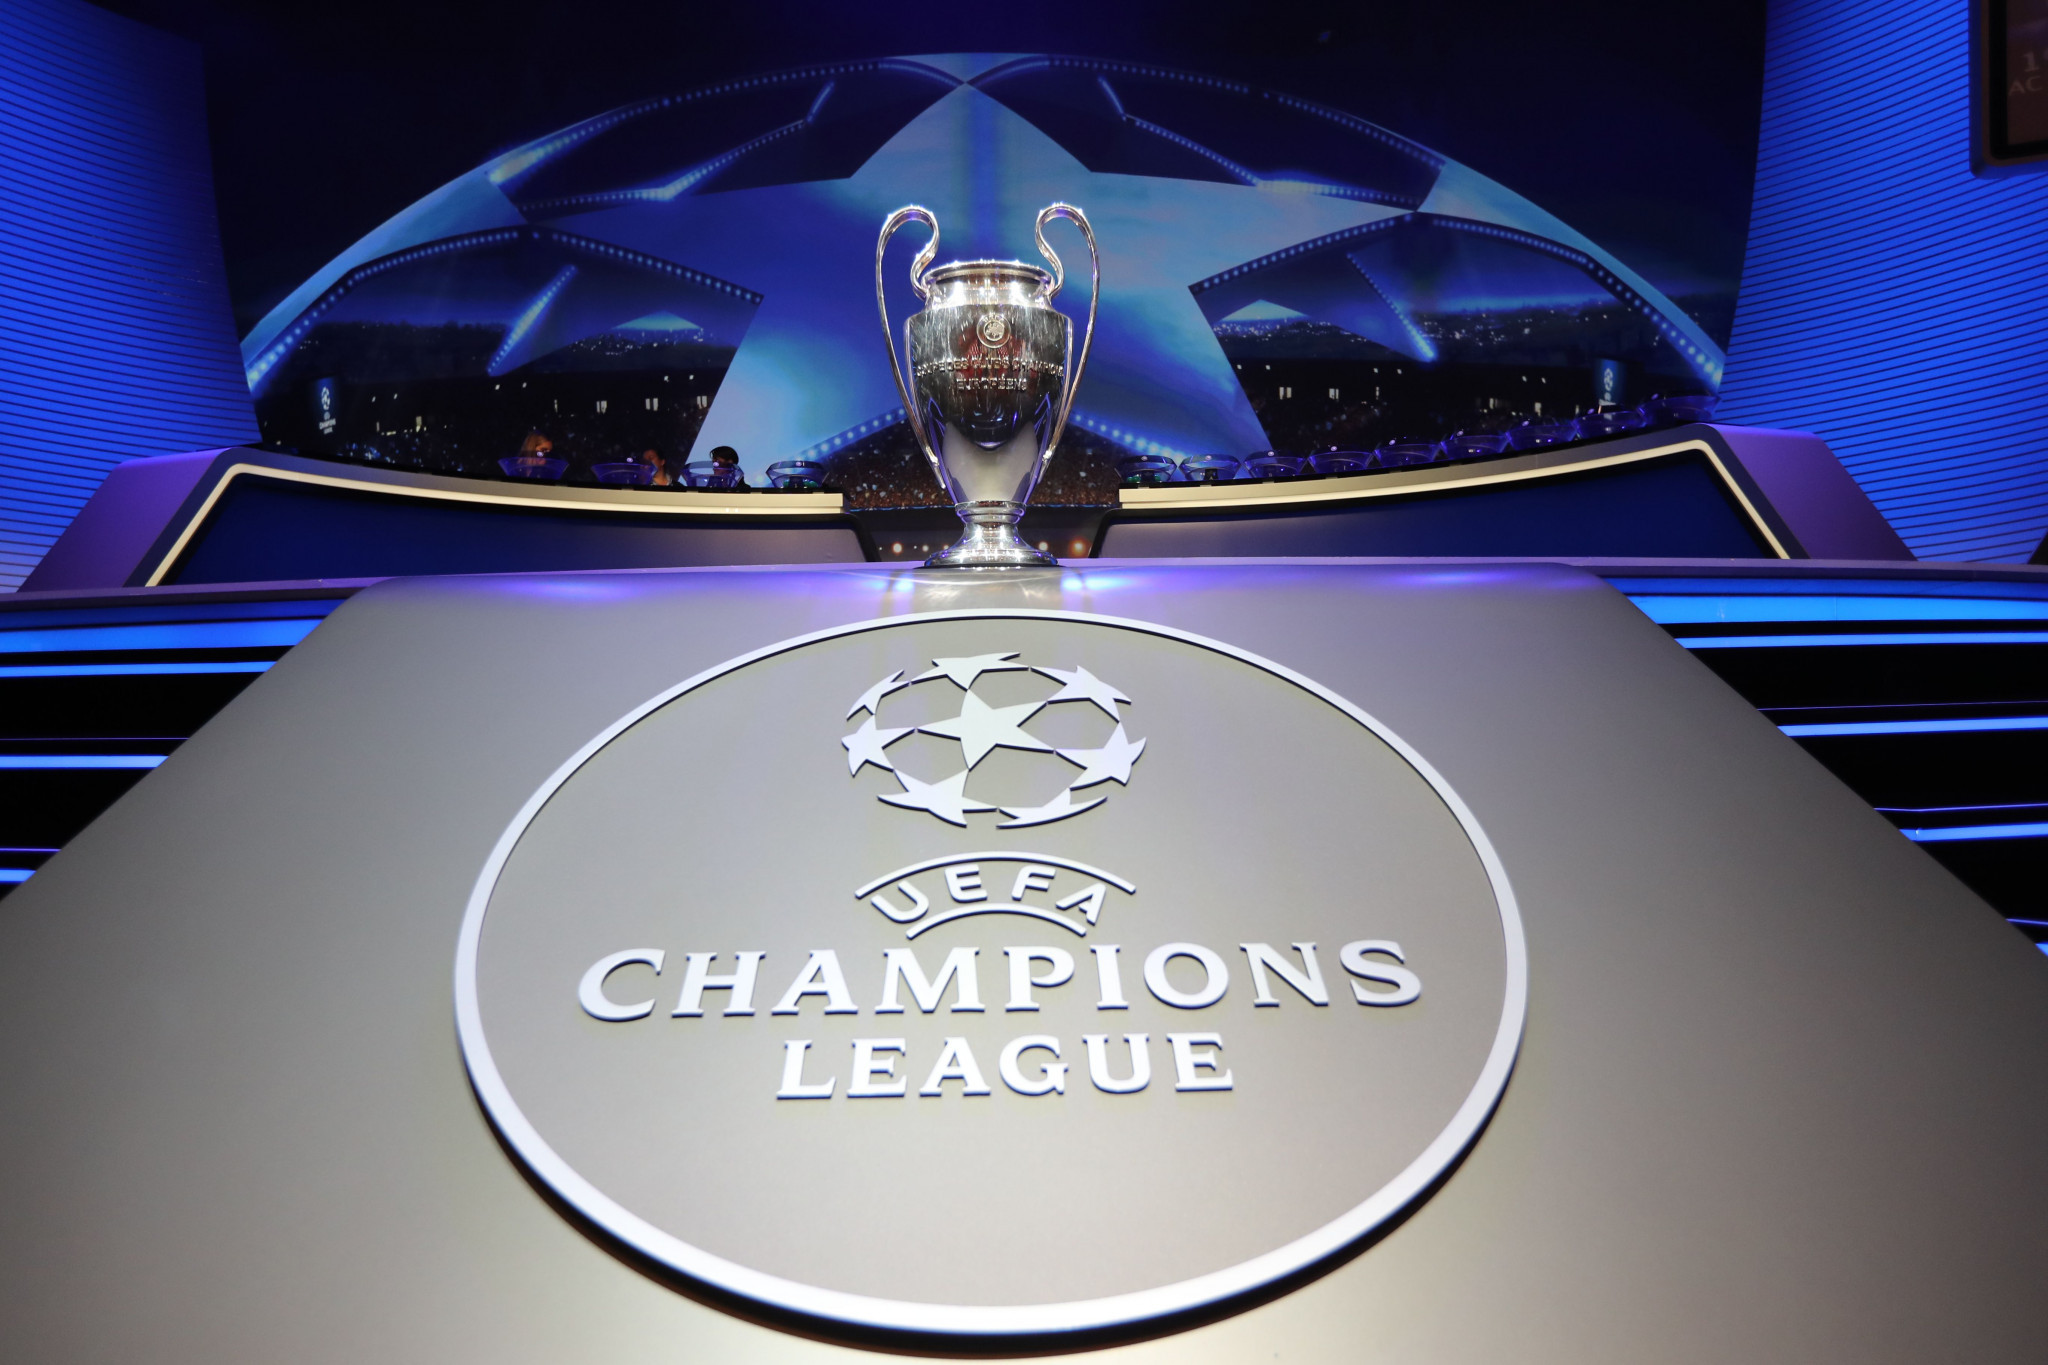 UEFA looking certain to move Champions League final after Russian invasion of Ukraine